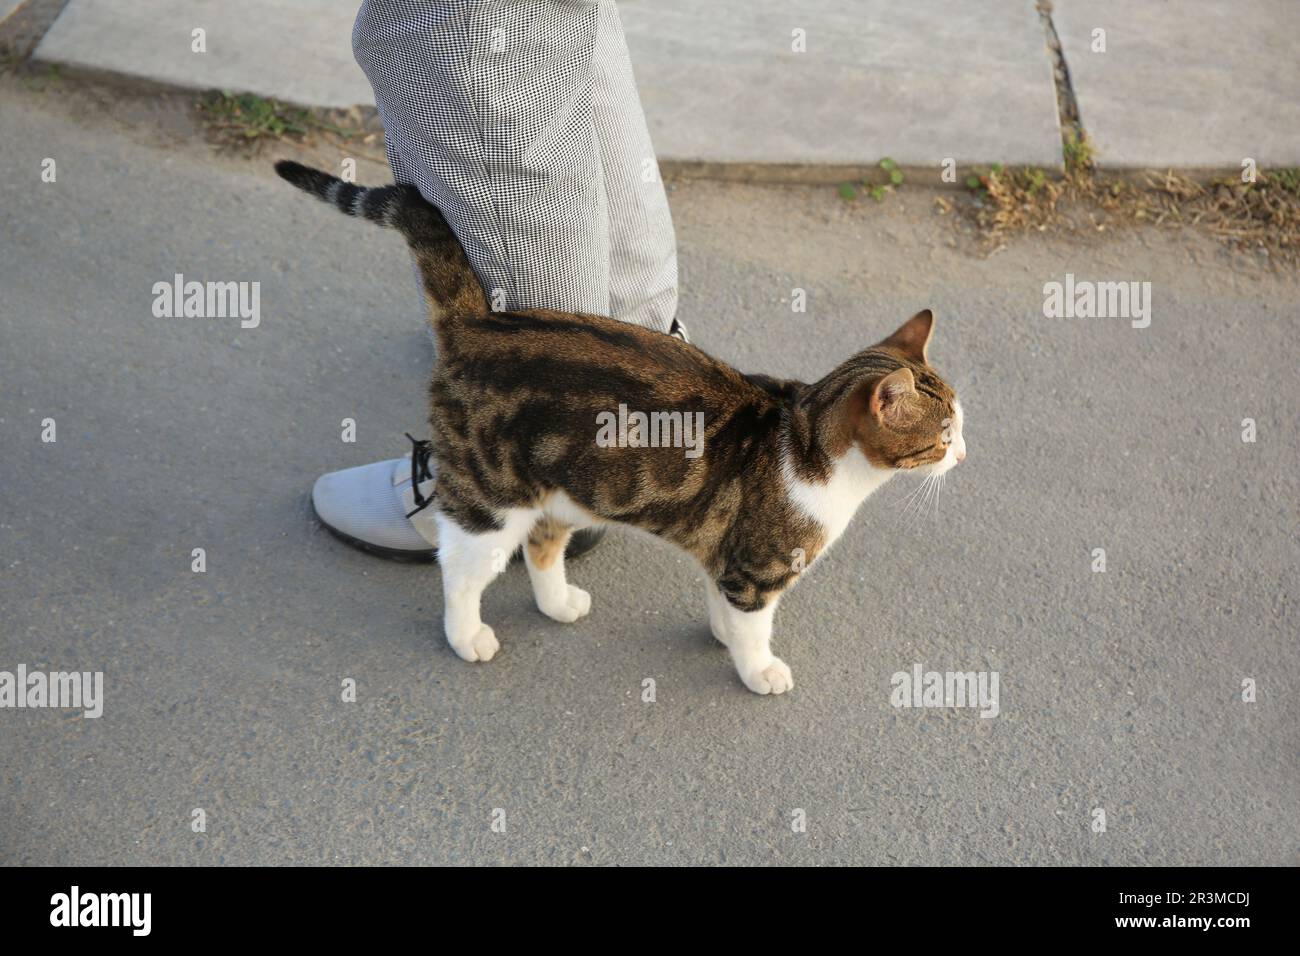 Cute cat rubbing against woman's legs outdoors. Homeless animal Stock Photo